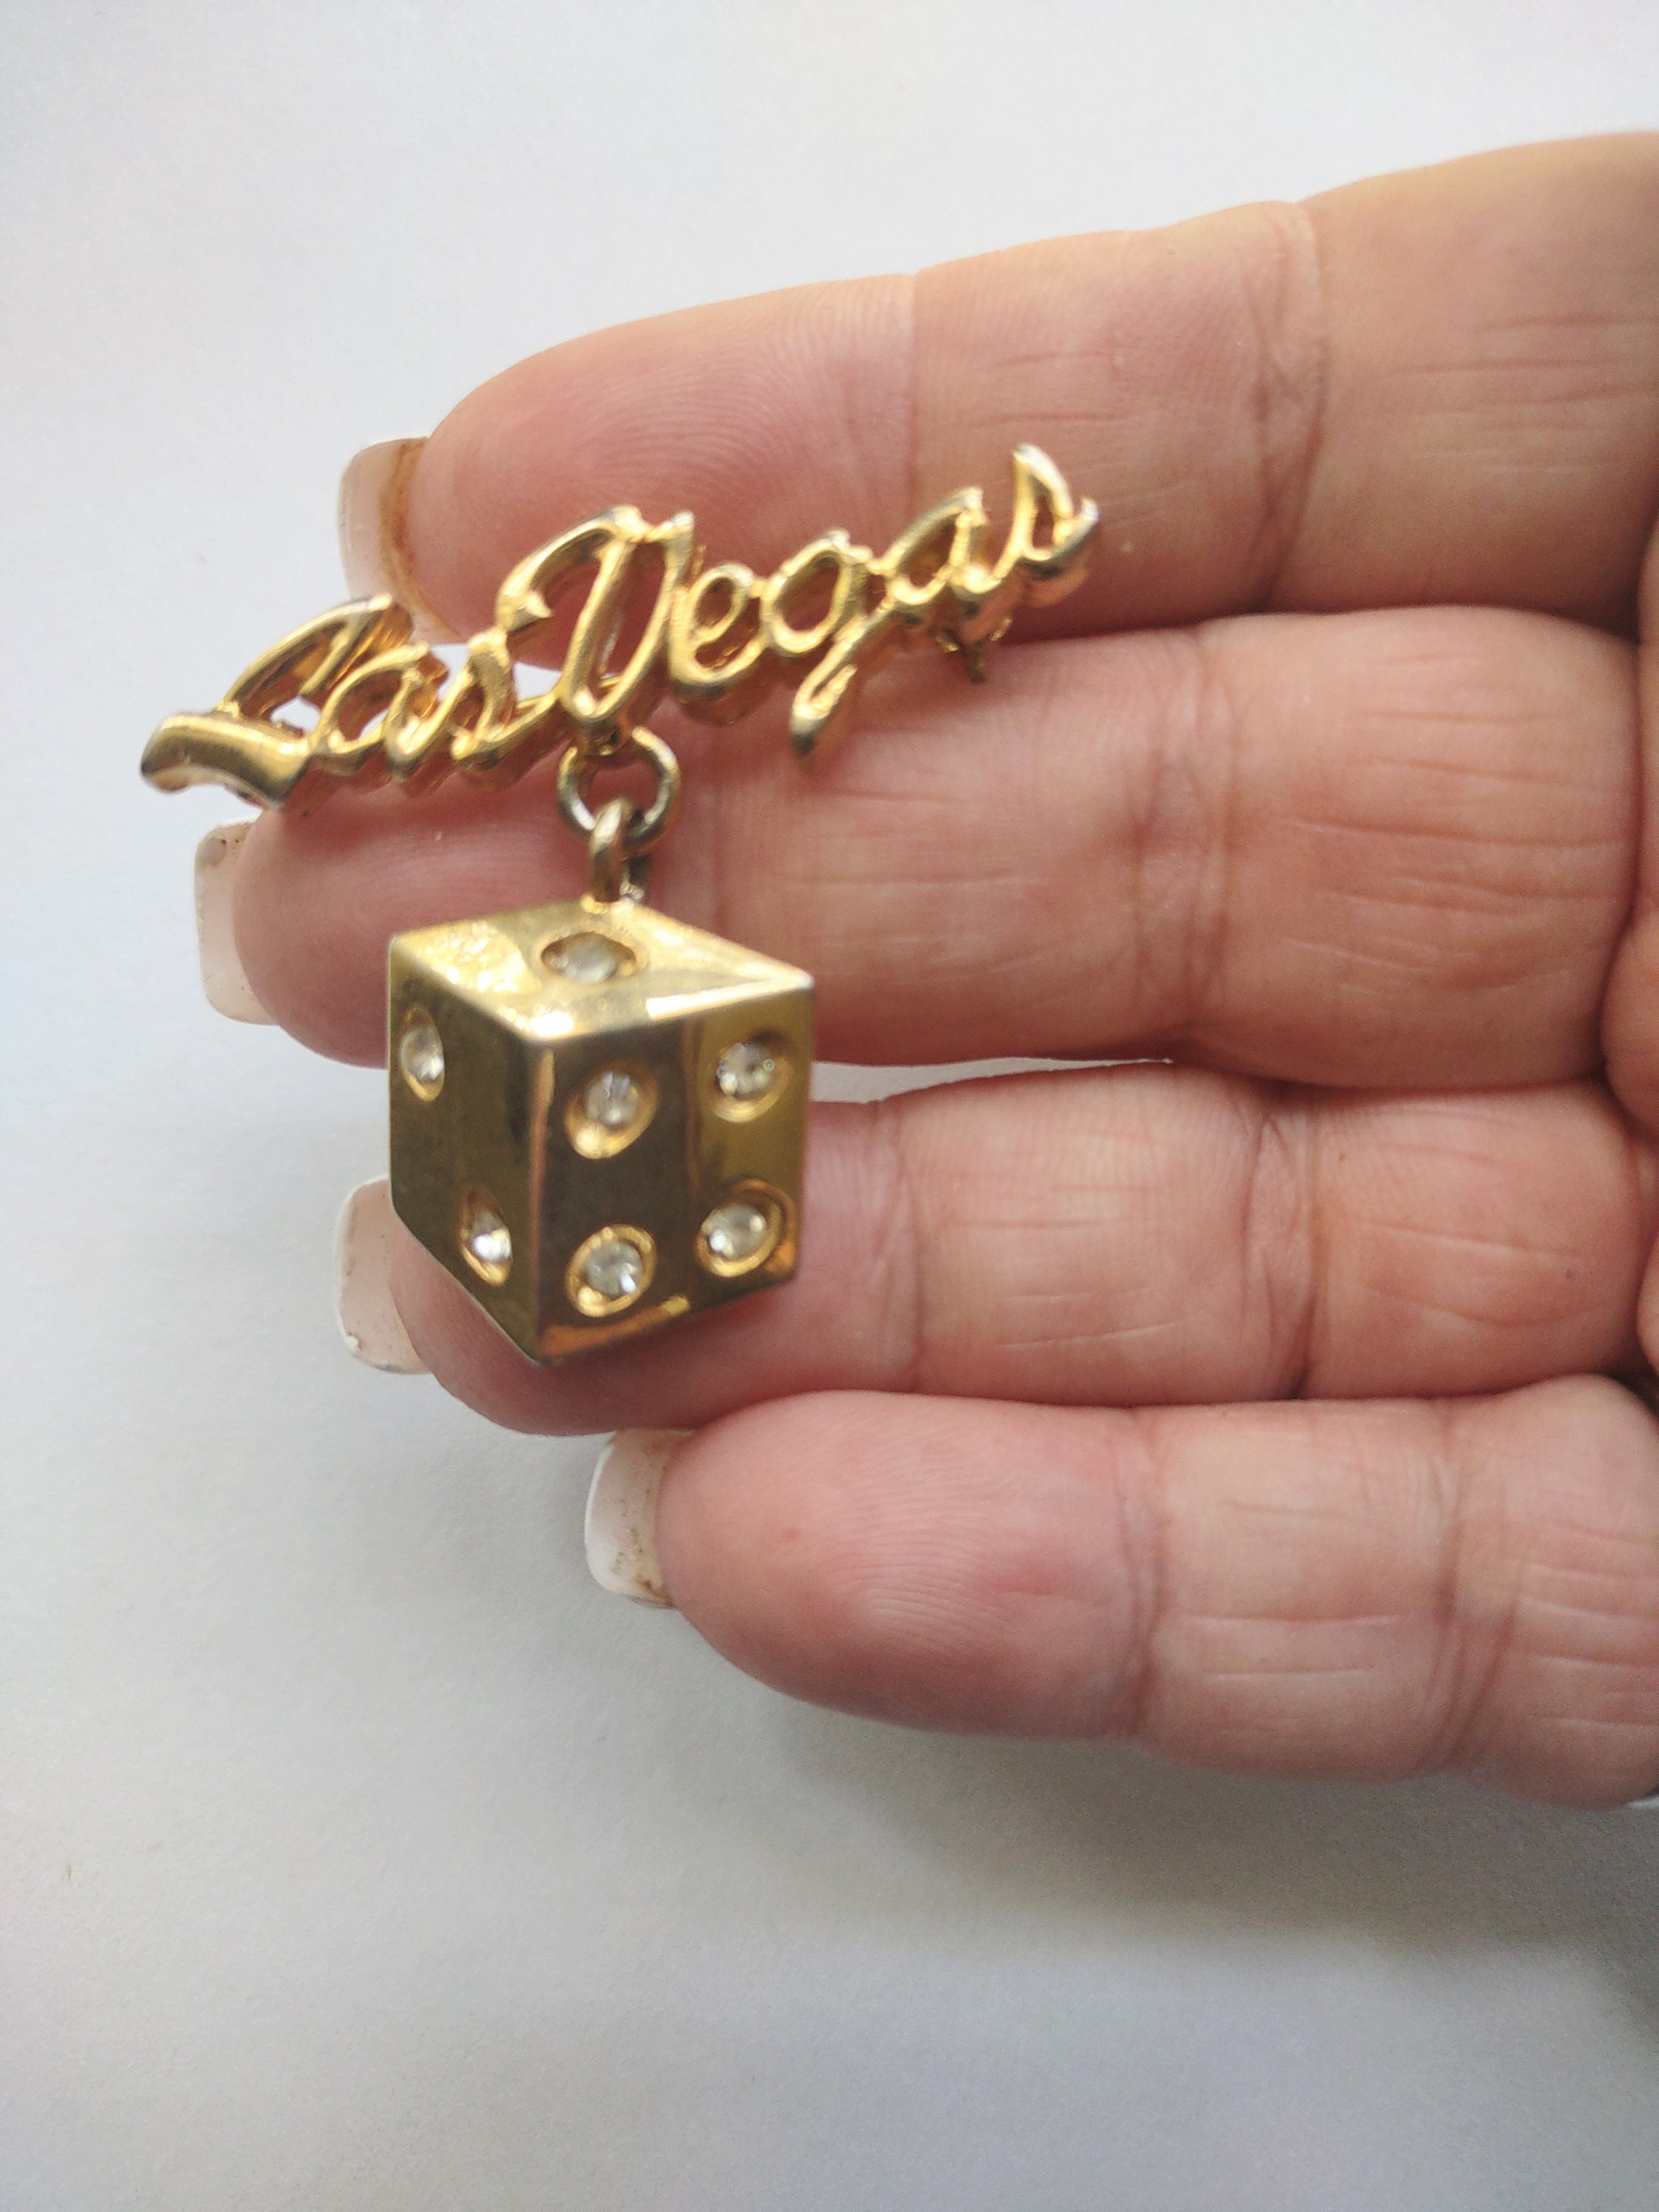 Las Vegas Welcome Sign Gold Dice Keychain Made with Swarovski Crystals